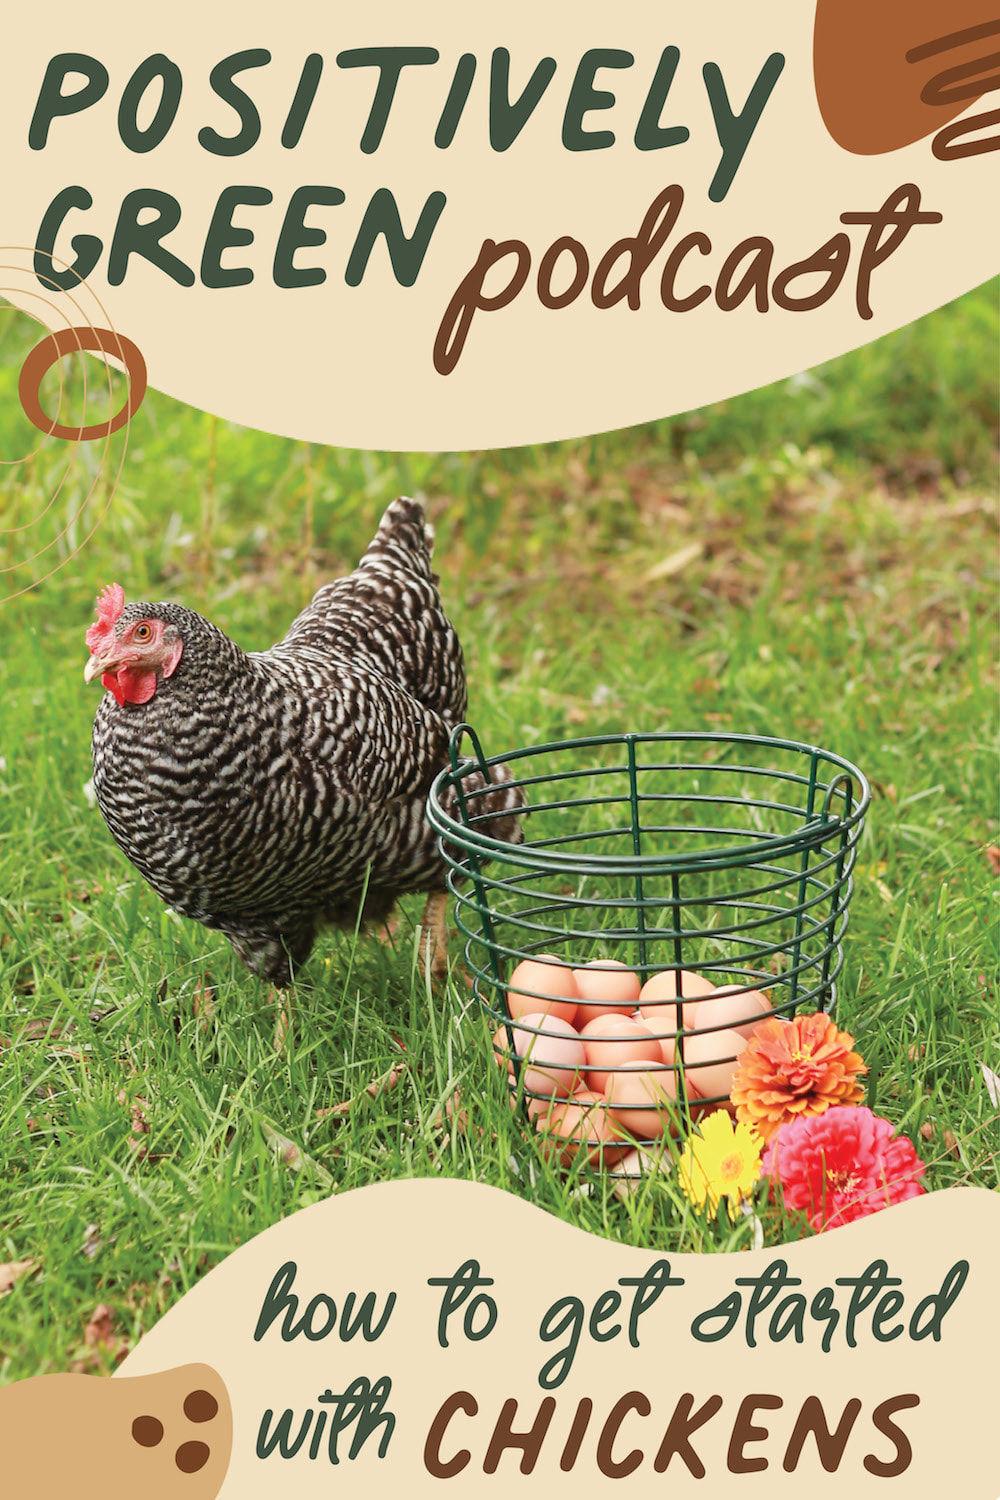 How to get started with Chickens - The Positively Green Podcast